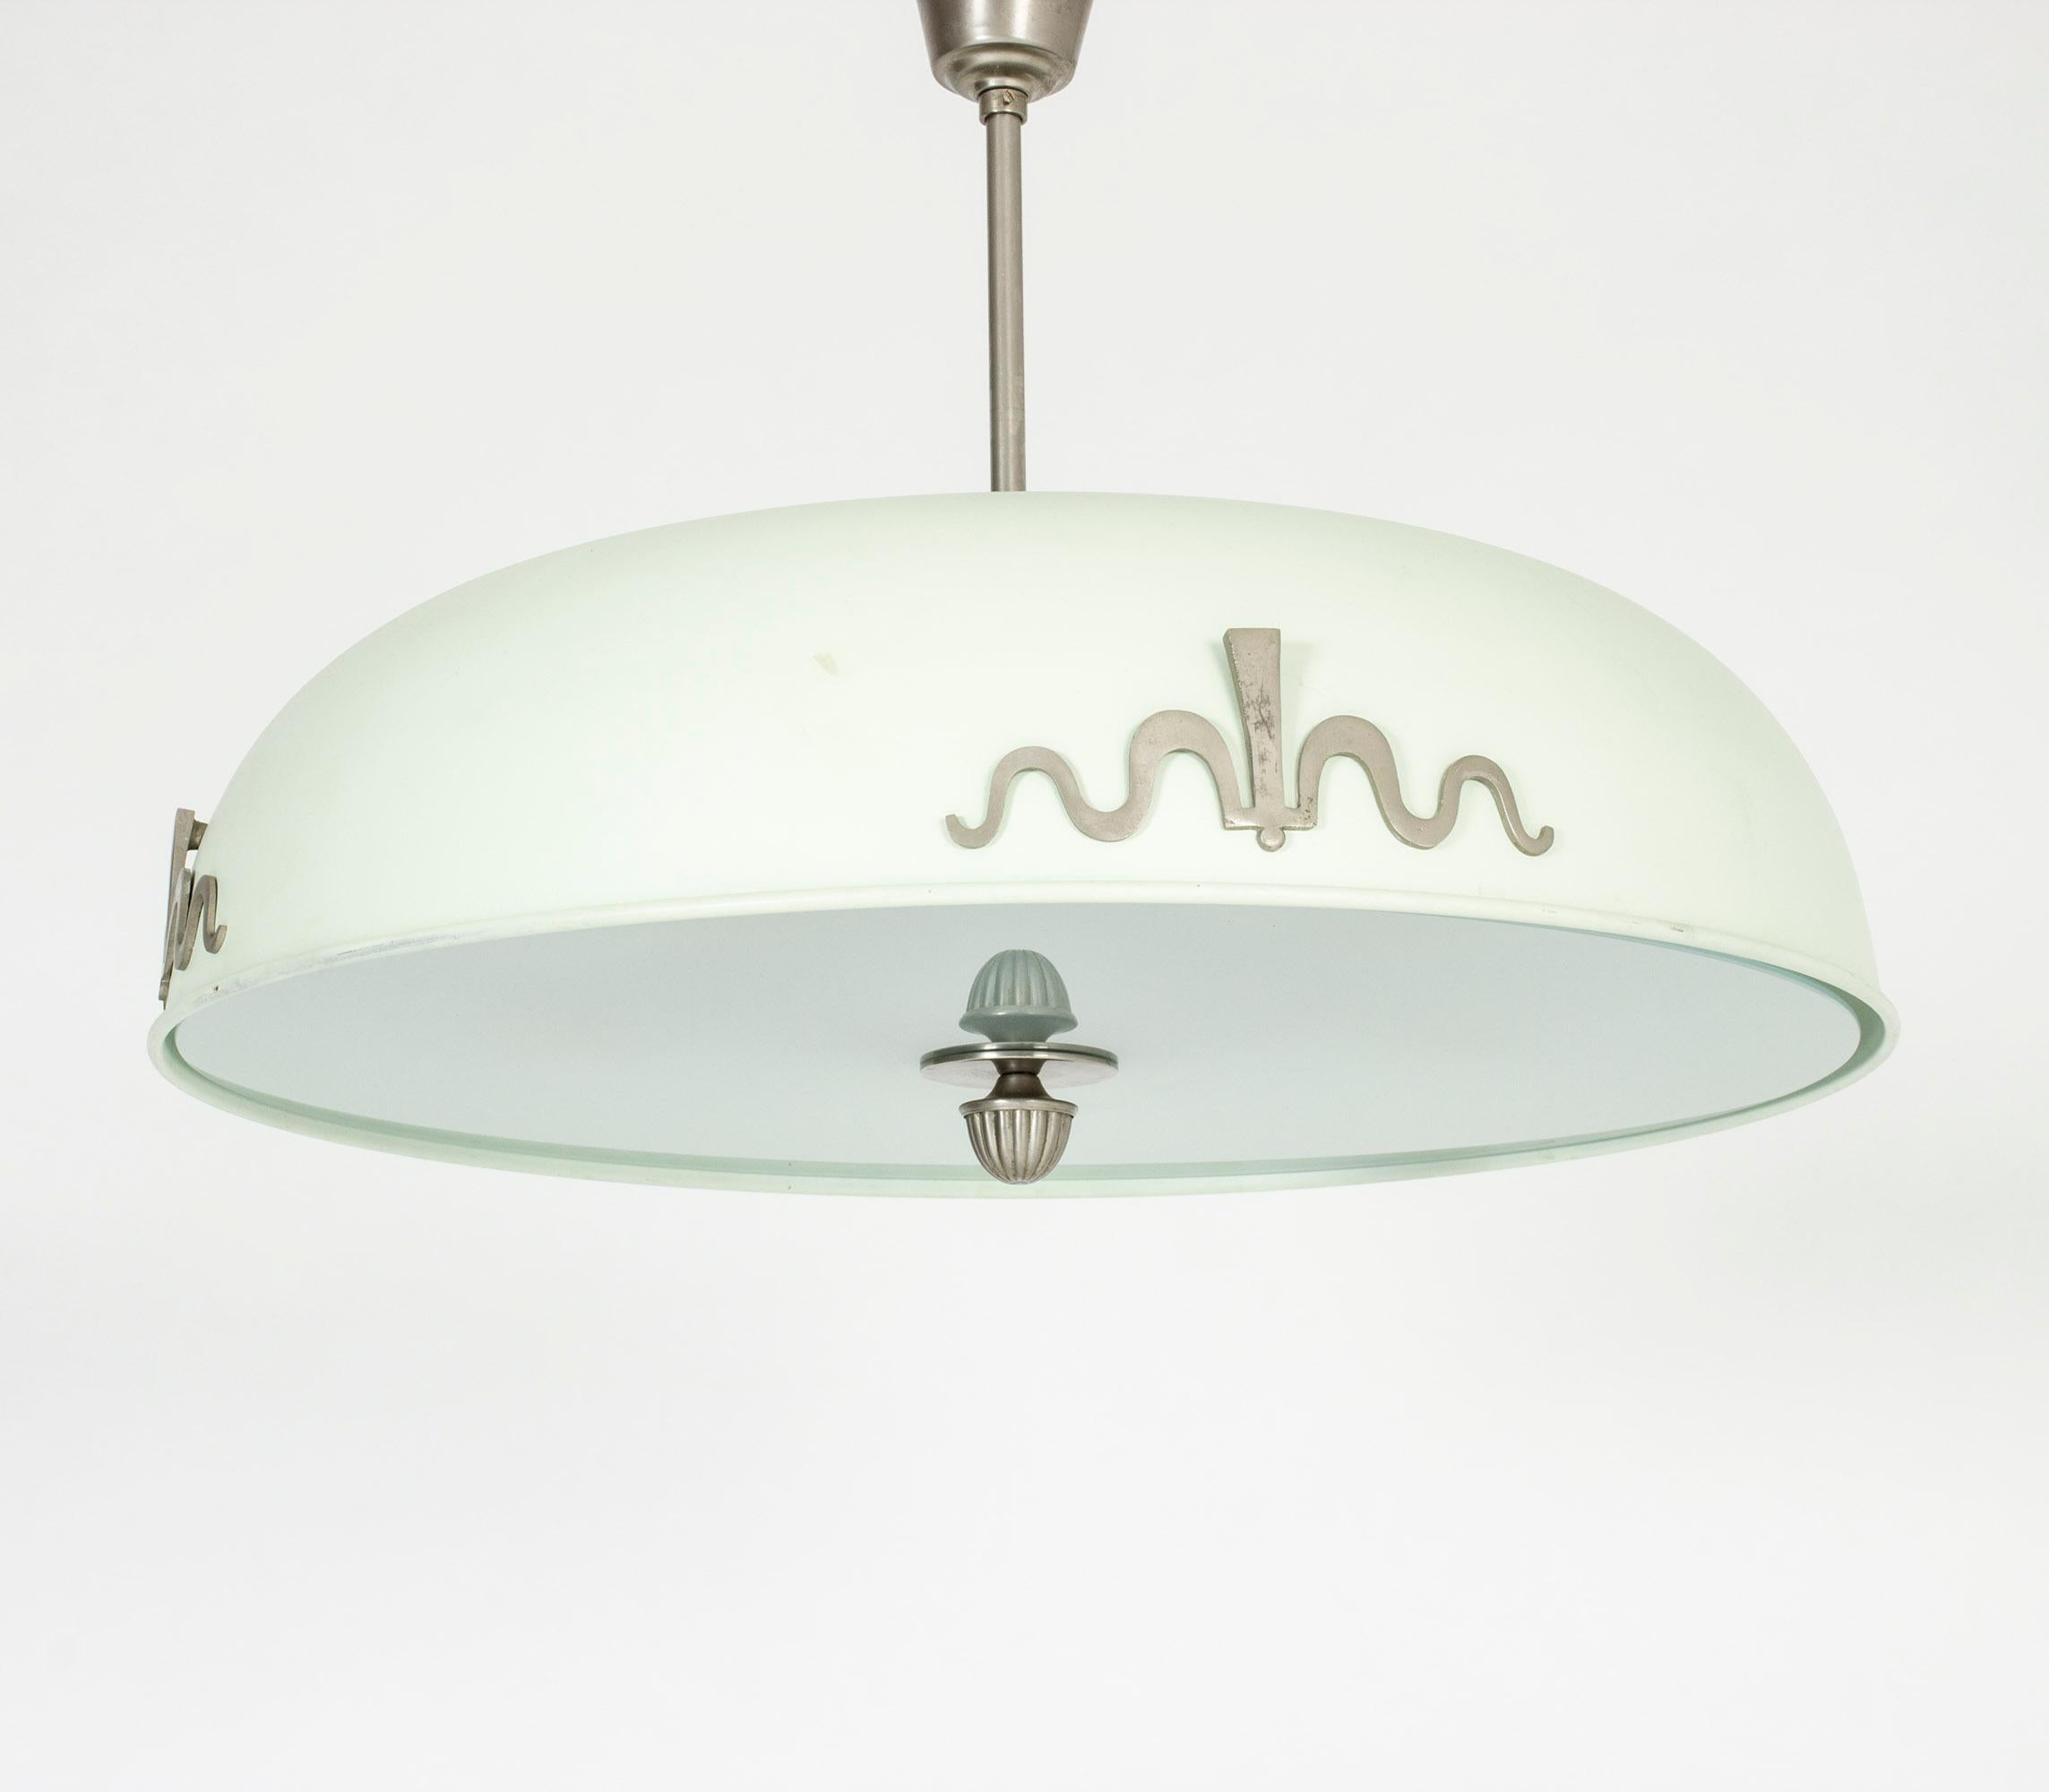 Beautiful metal and glass ceiling lamp, made in Sweden in the 1930s. Lacquered pale green with metal appliqués and a glass disk shielding the downward light. Three-light sources on the top create an uplight.